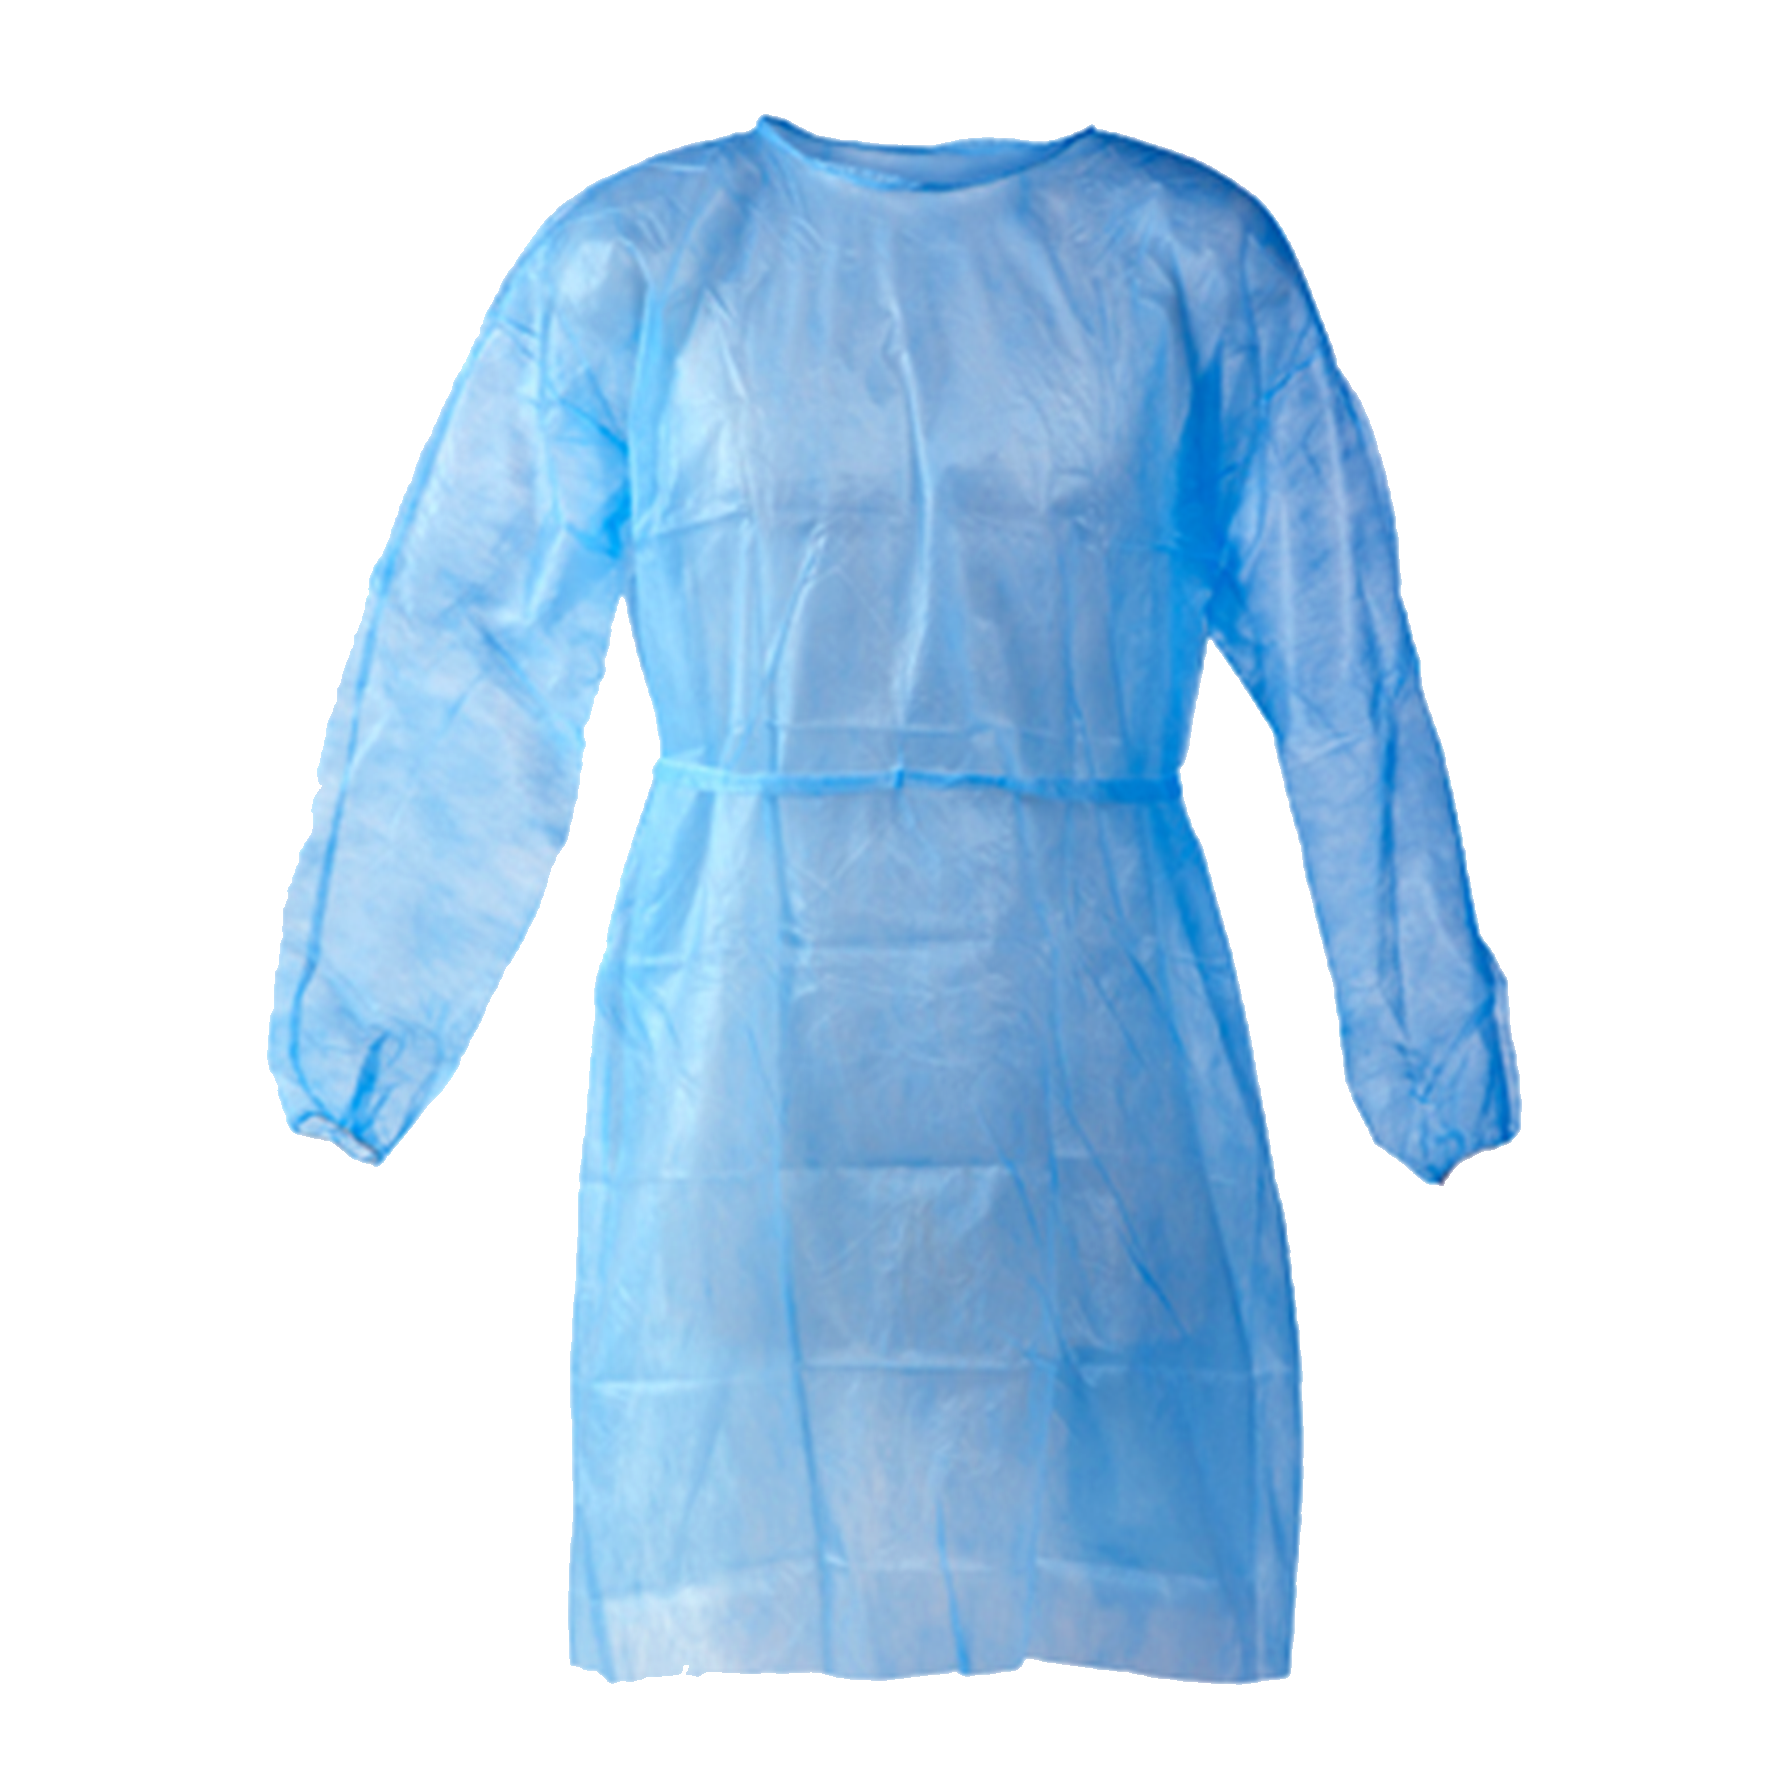 AusMed Health | Isolation Gowns | Level 3 | Hospital Grade (1 Carton/50 Gowns)